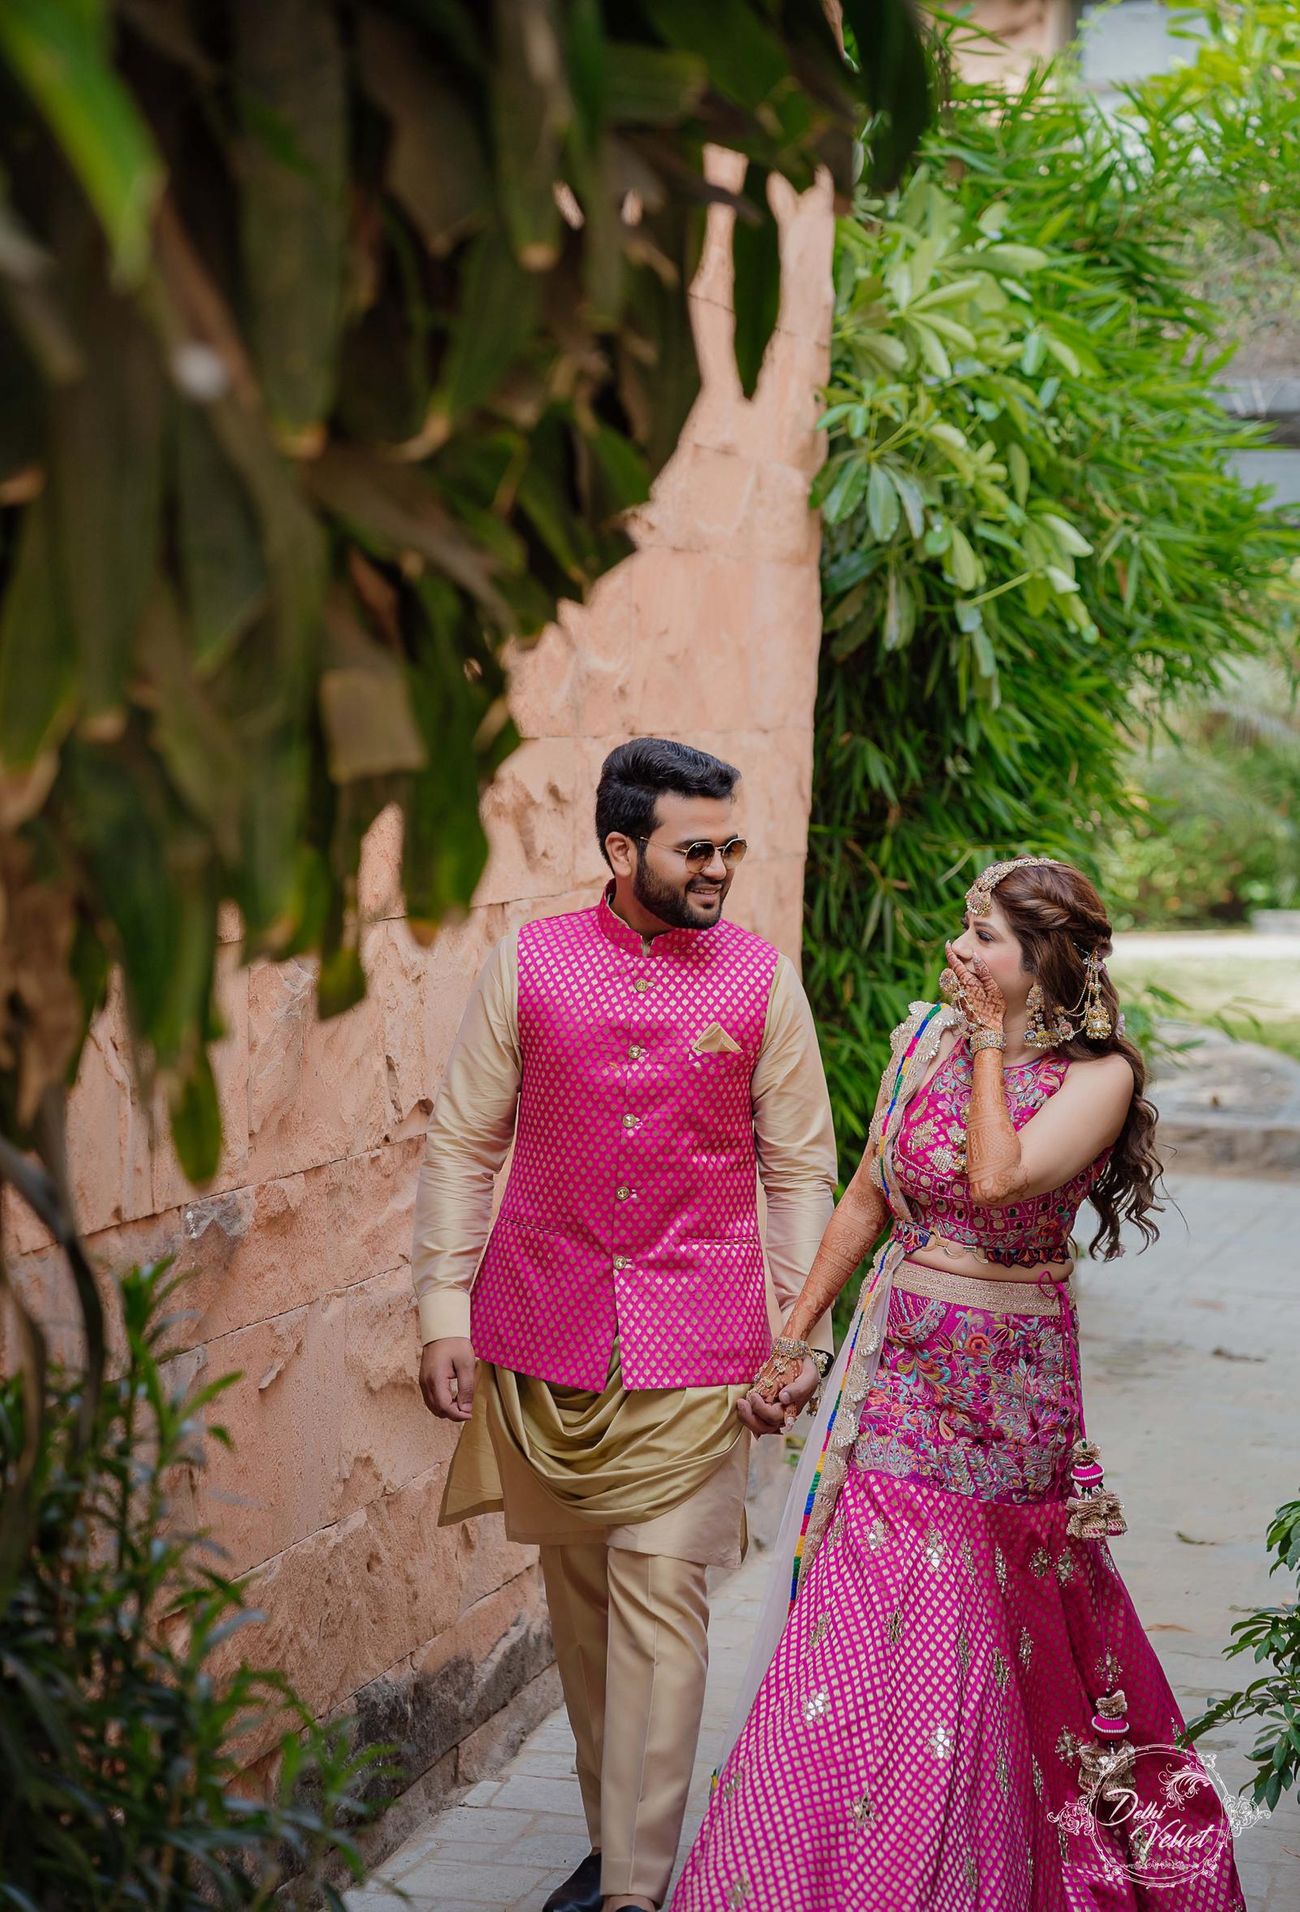 Beautiful Delhi Nuptials With The Couple In Customised Sea Green ...